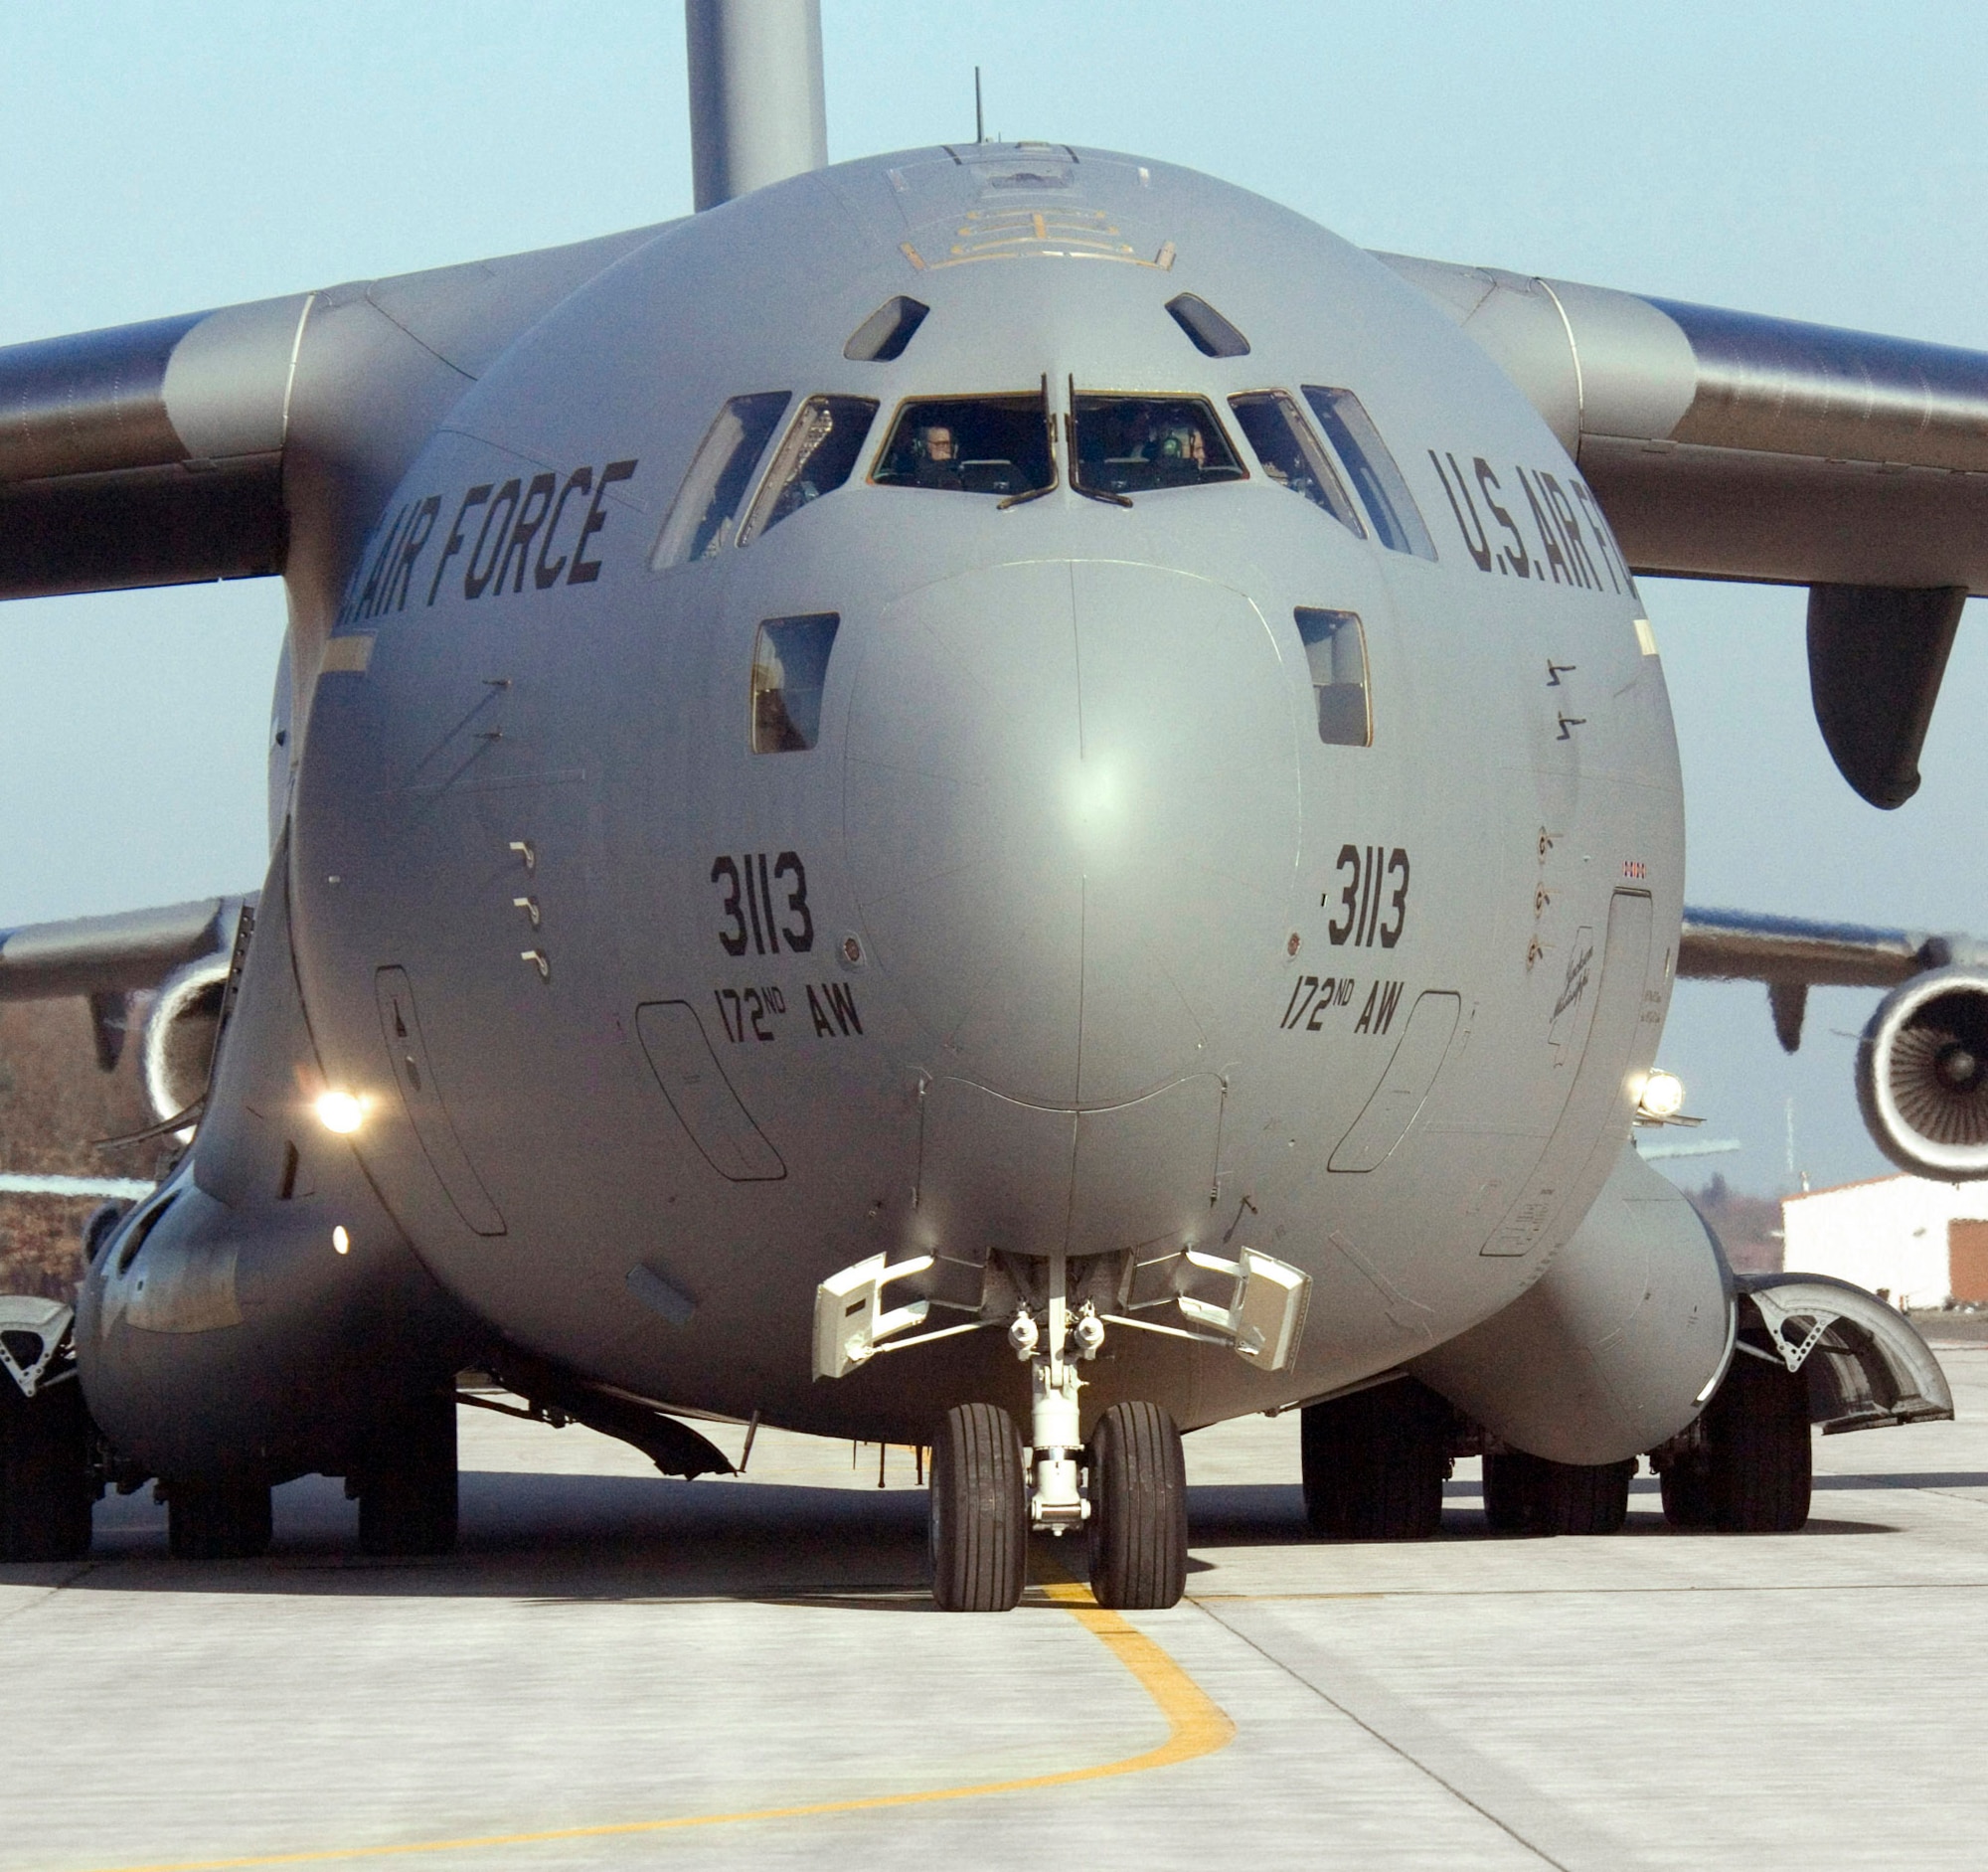 An Airman marshals a C-17 Globemaster III as it begins a mission from Ramstein Air Base, Germany, on Sunday, March 19, 2006. The Mississippi Air National Guard transport delivered cargo to Al Asad, Iraq, and returned from Balad Air Base, Iraq, as an aeromedical mission which put the air transport past the 1 millionth hour of flight time. (U.S. Air Force photo/Master Sgt. John E. Lasky) 